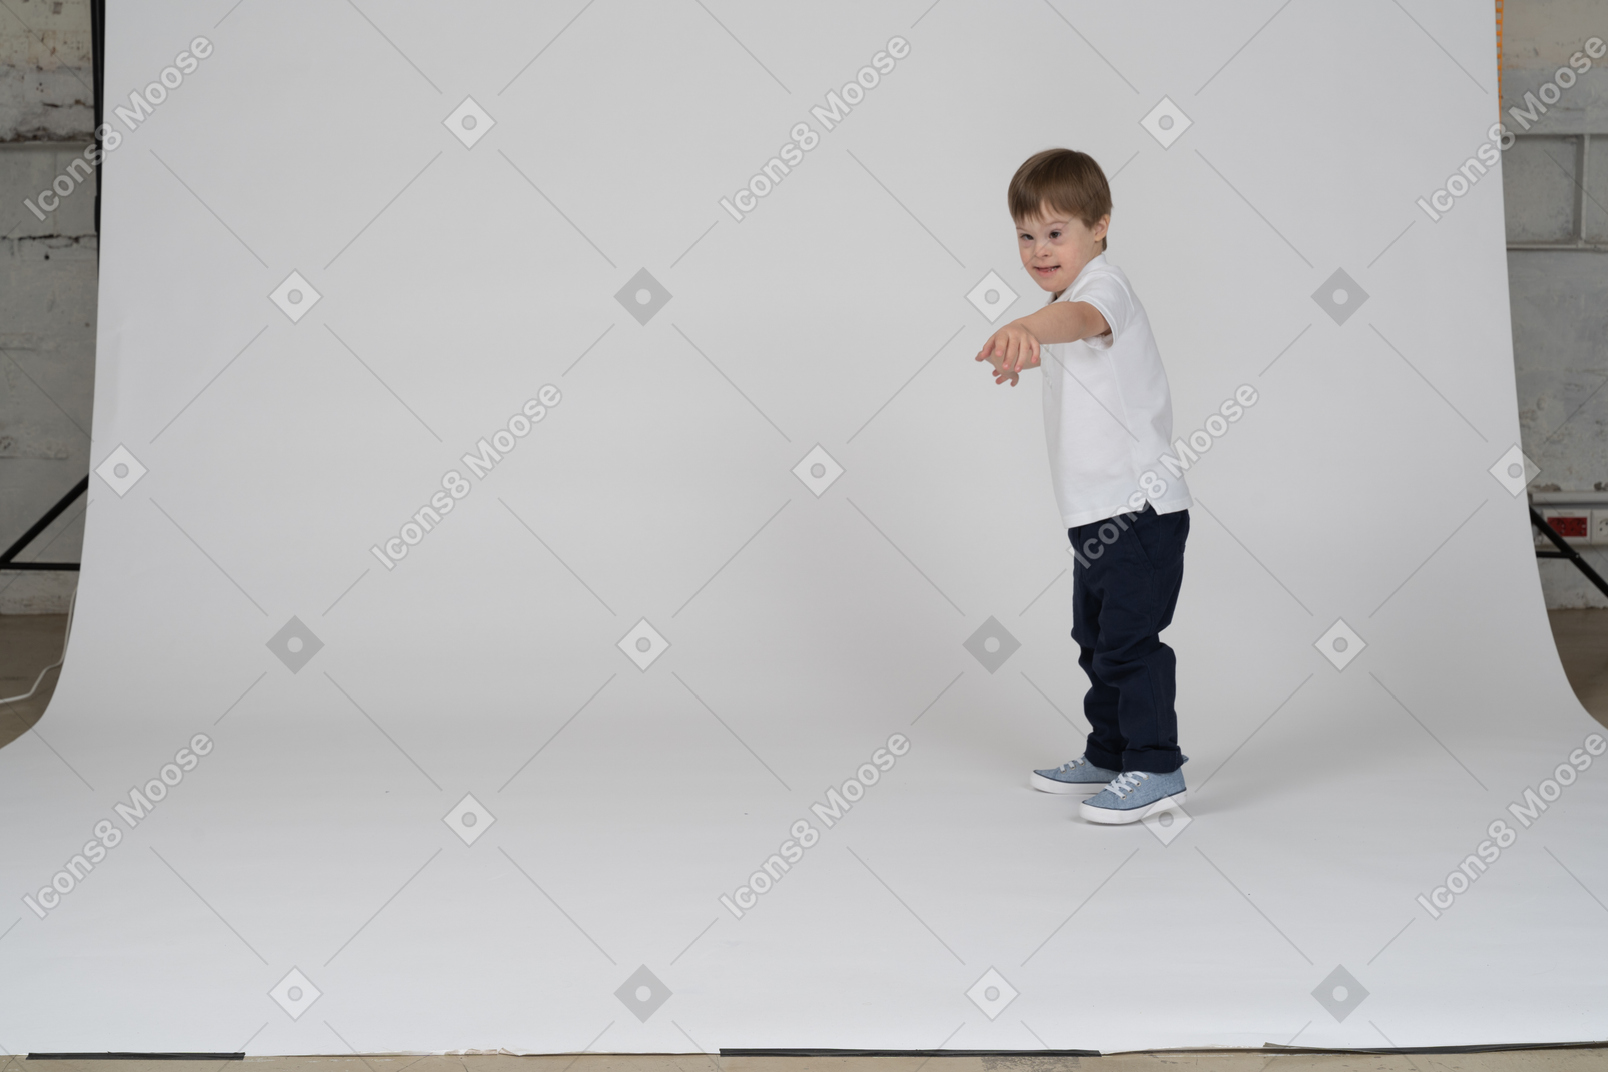 Side view of a boy reaching out his hand